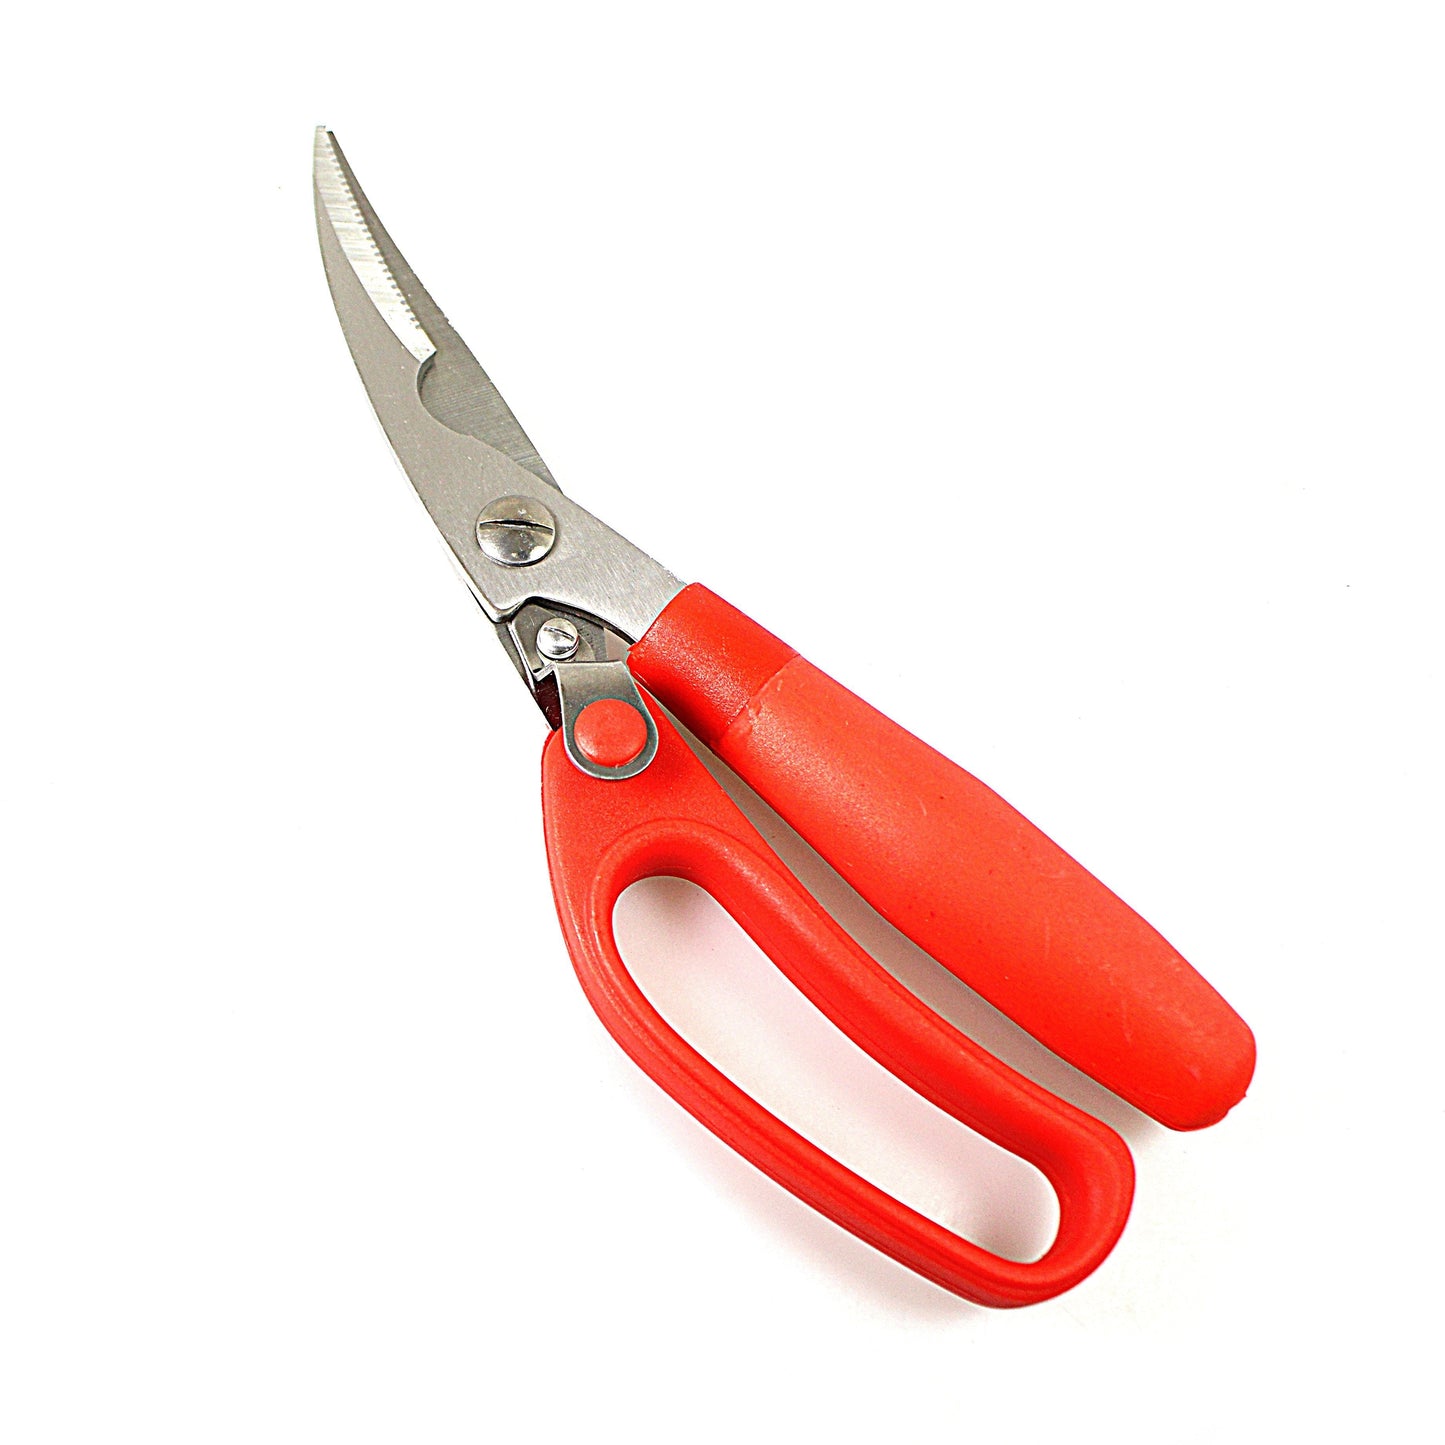 General Purpose Kitchen Household Scissors 15cm Assorted Colours 0357 (Large Letter Rate)